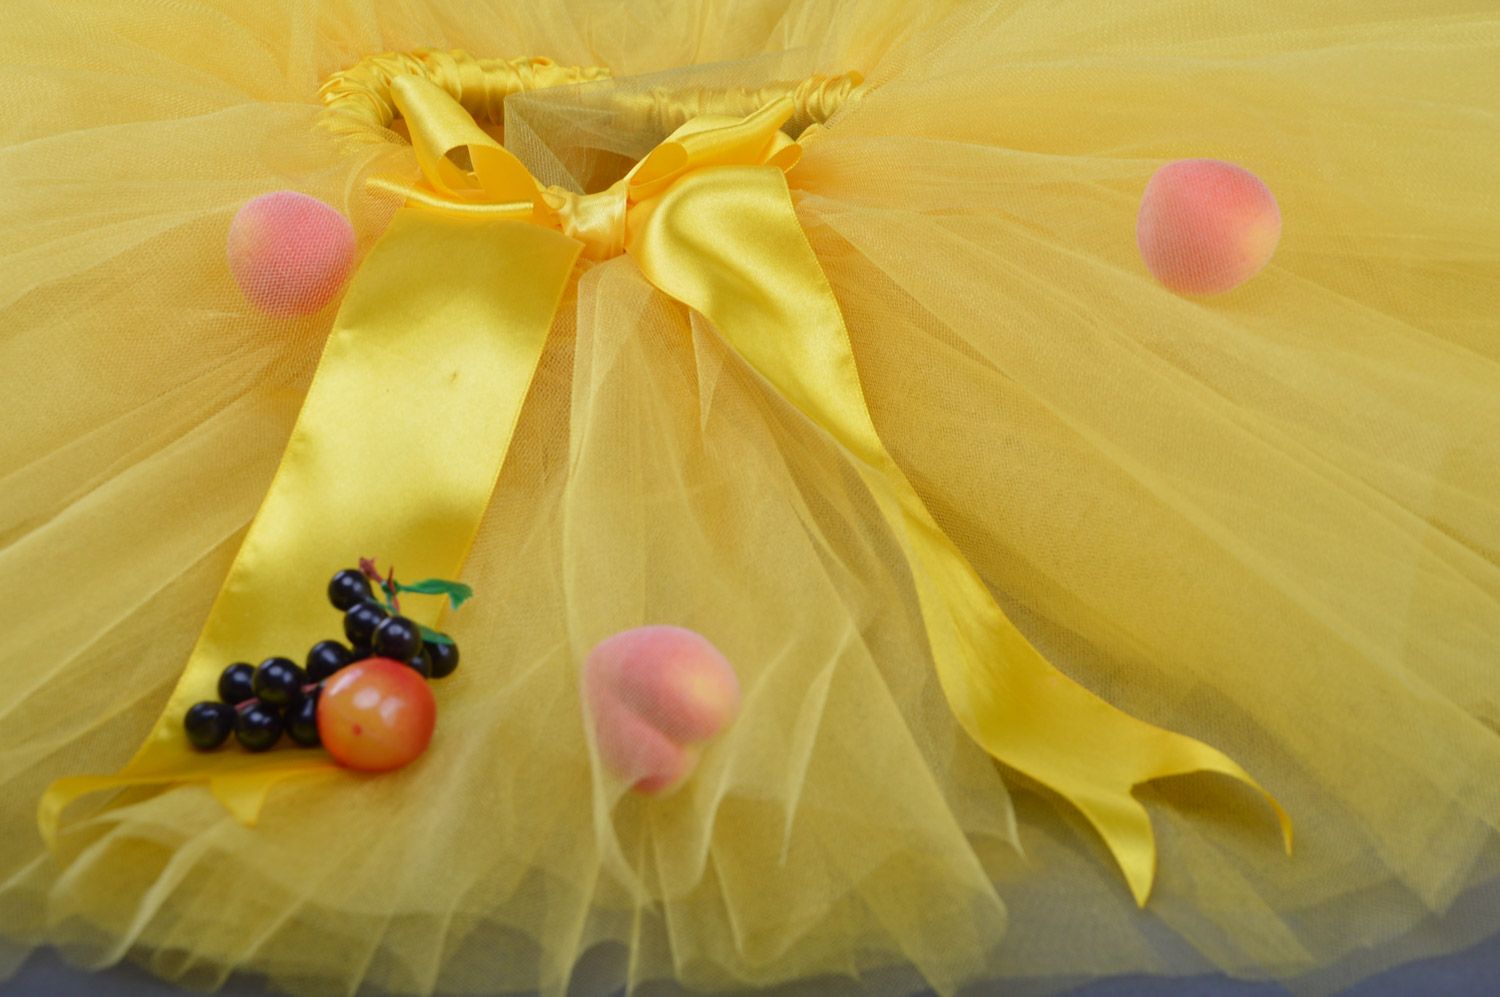 Handmade ballet tutu skirt sewn of bright yellow tulle and ribbons for children photo 4